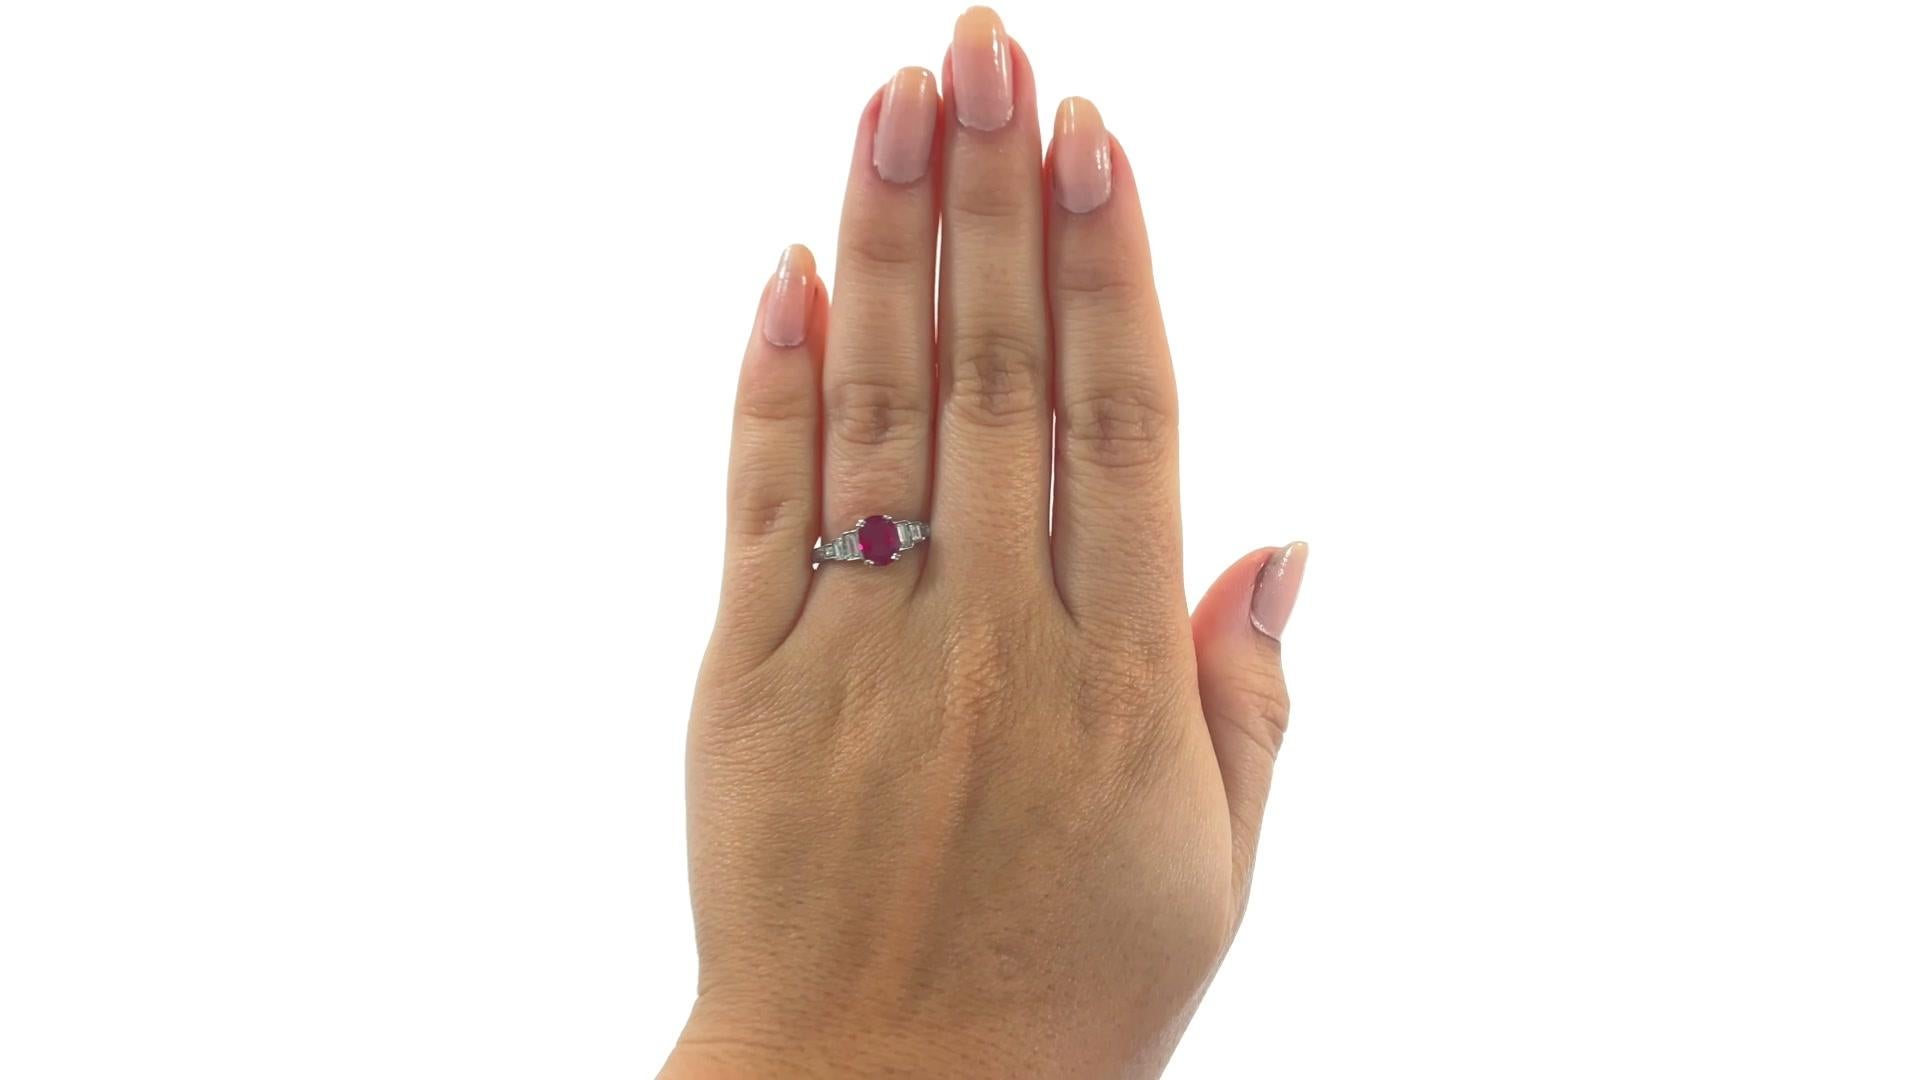 Jack Weir & Sons 1.16 Carat GIA Burma Ruby Diamond Platinum Engagement Ring. The main gem is a GIA certified 1.16 carat oval Burma ruby. Accented by 6 emerald cut diamonds & 4 round brilliant cut diamonds 0.30 carat total, H-I color, SI clarity. GIA